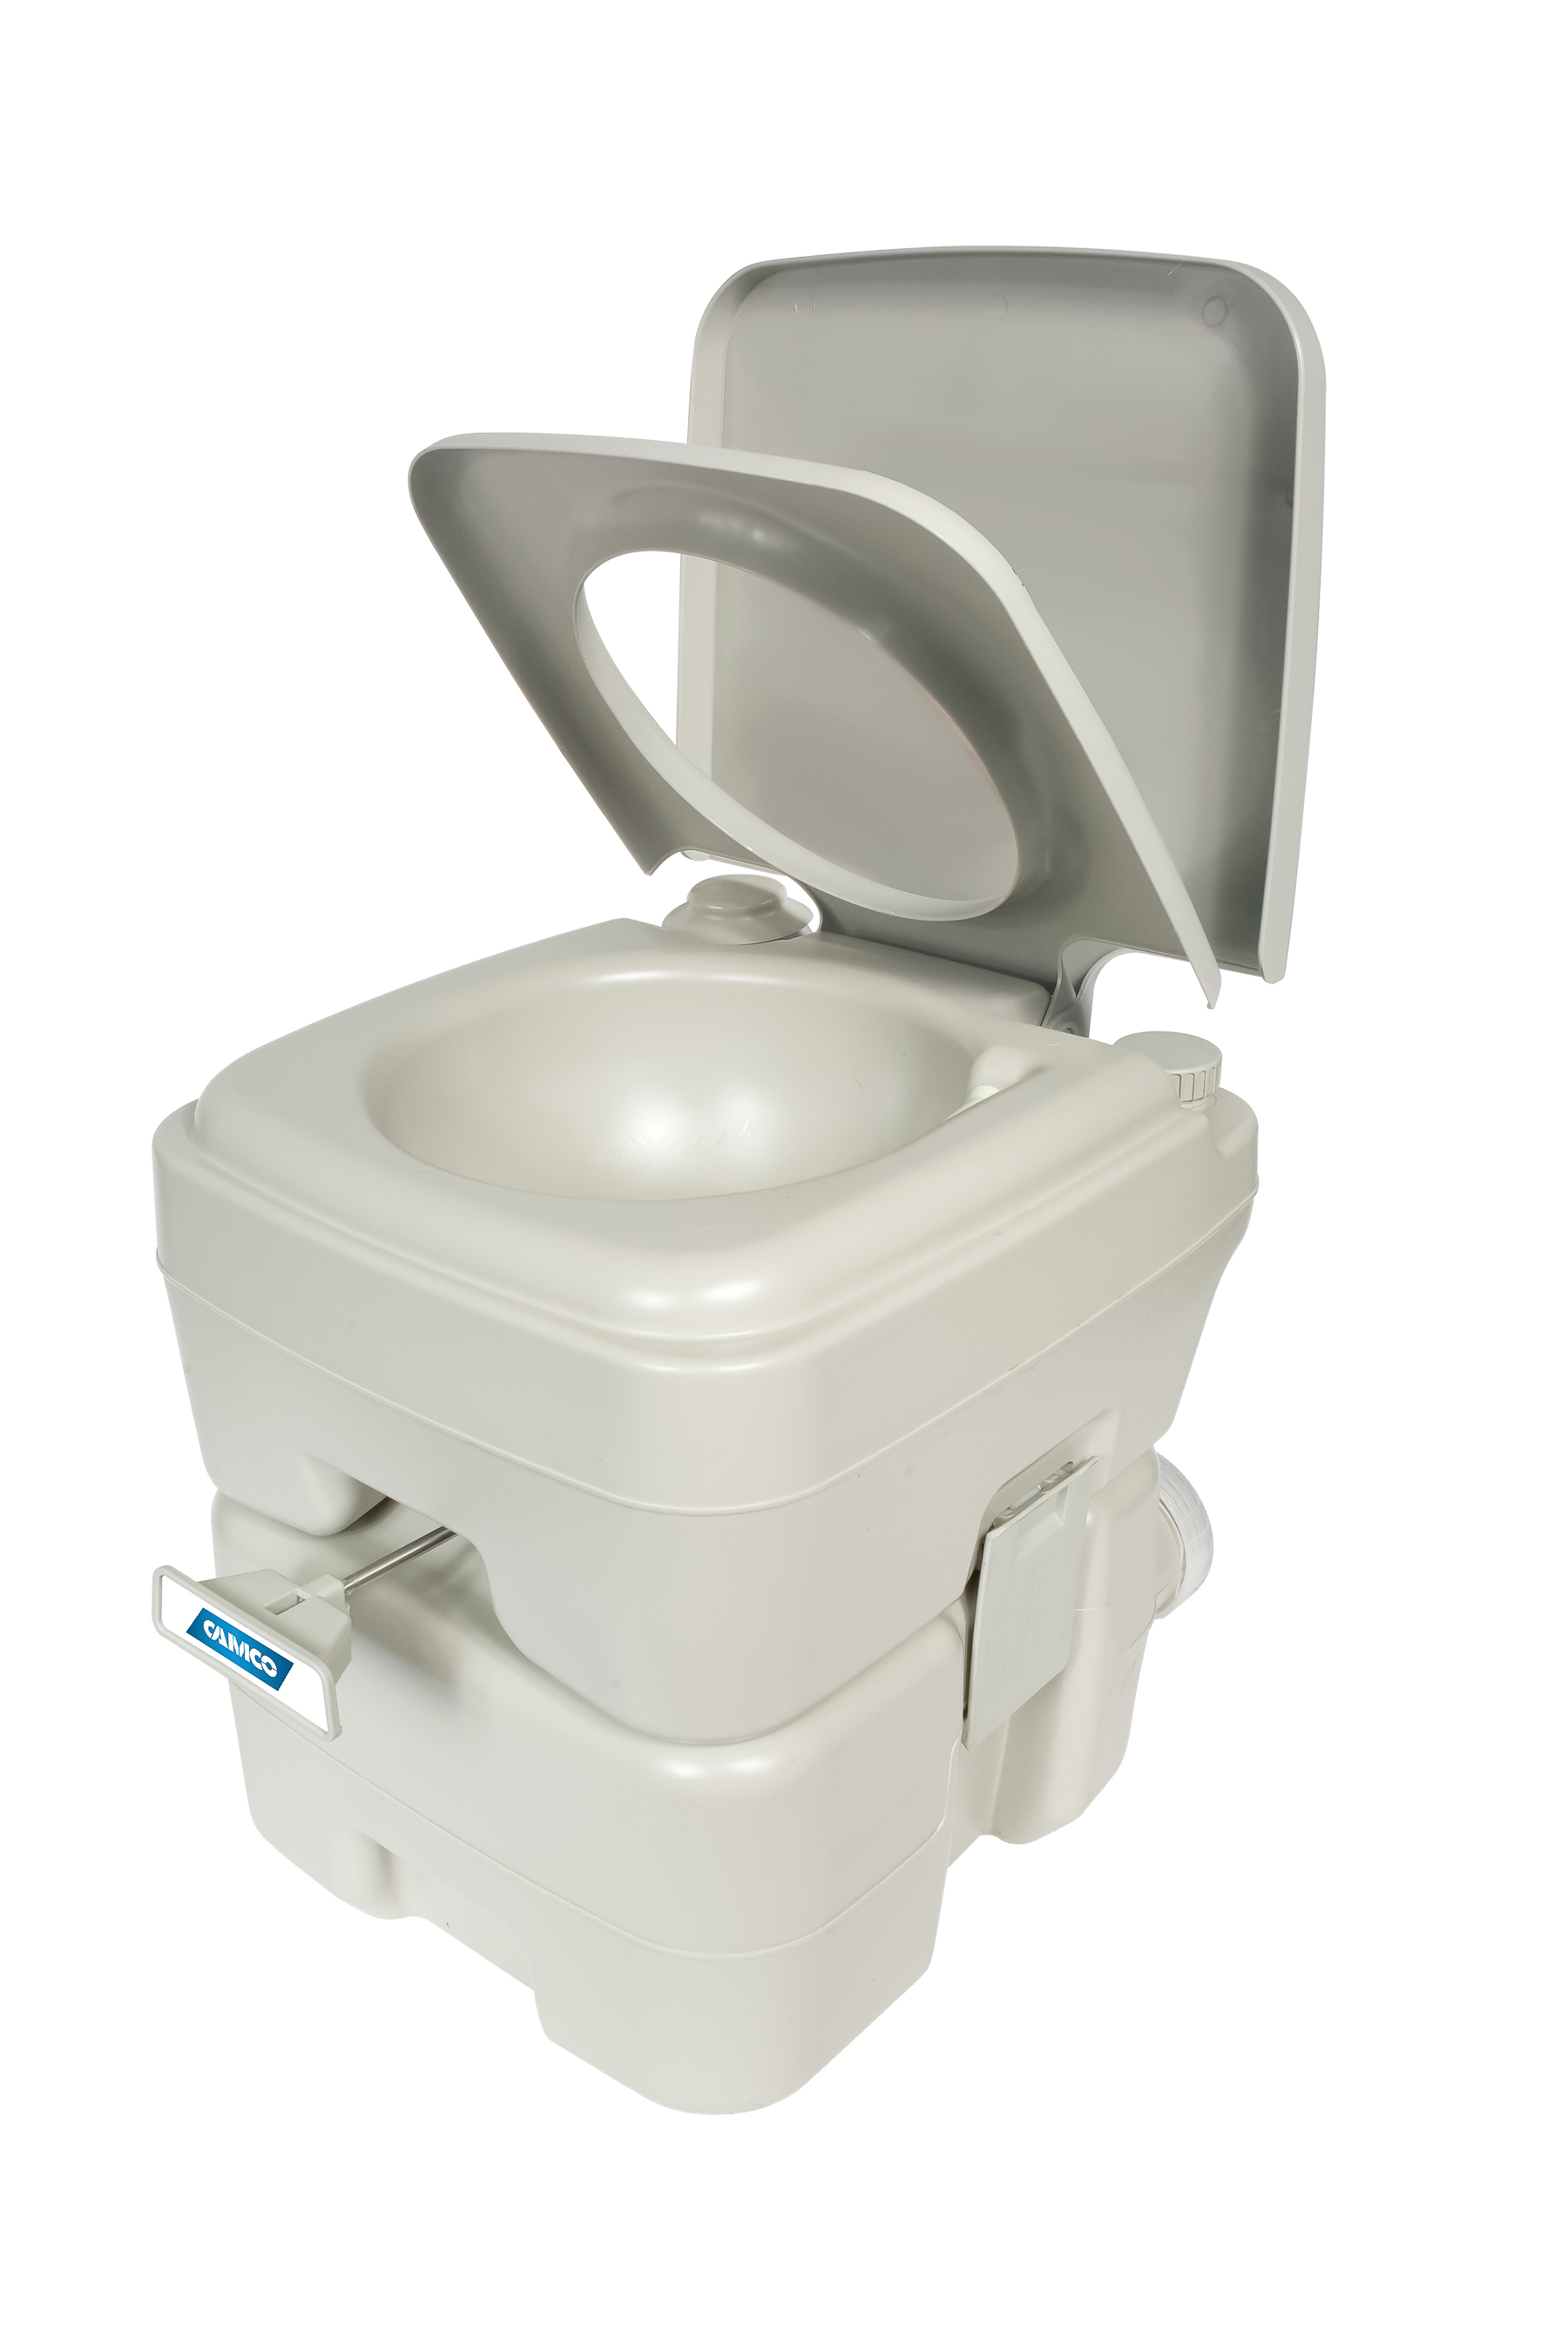 Camco 41541 Portable Toilet, 5.3 Gallon for RV, Camping, Boating and Outdoor - image 1 of 5